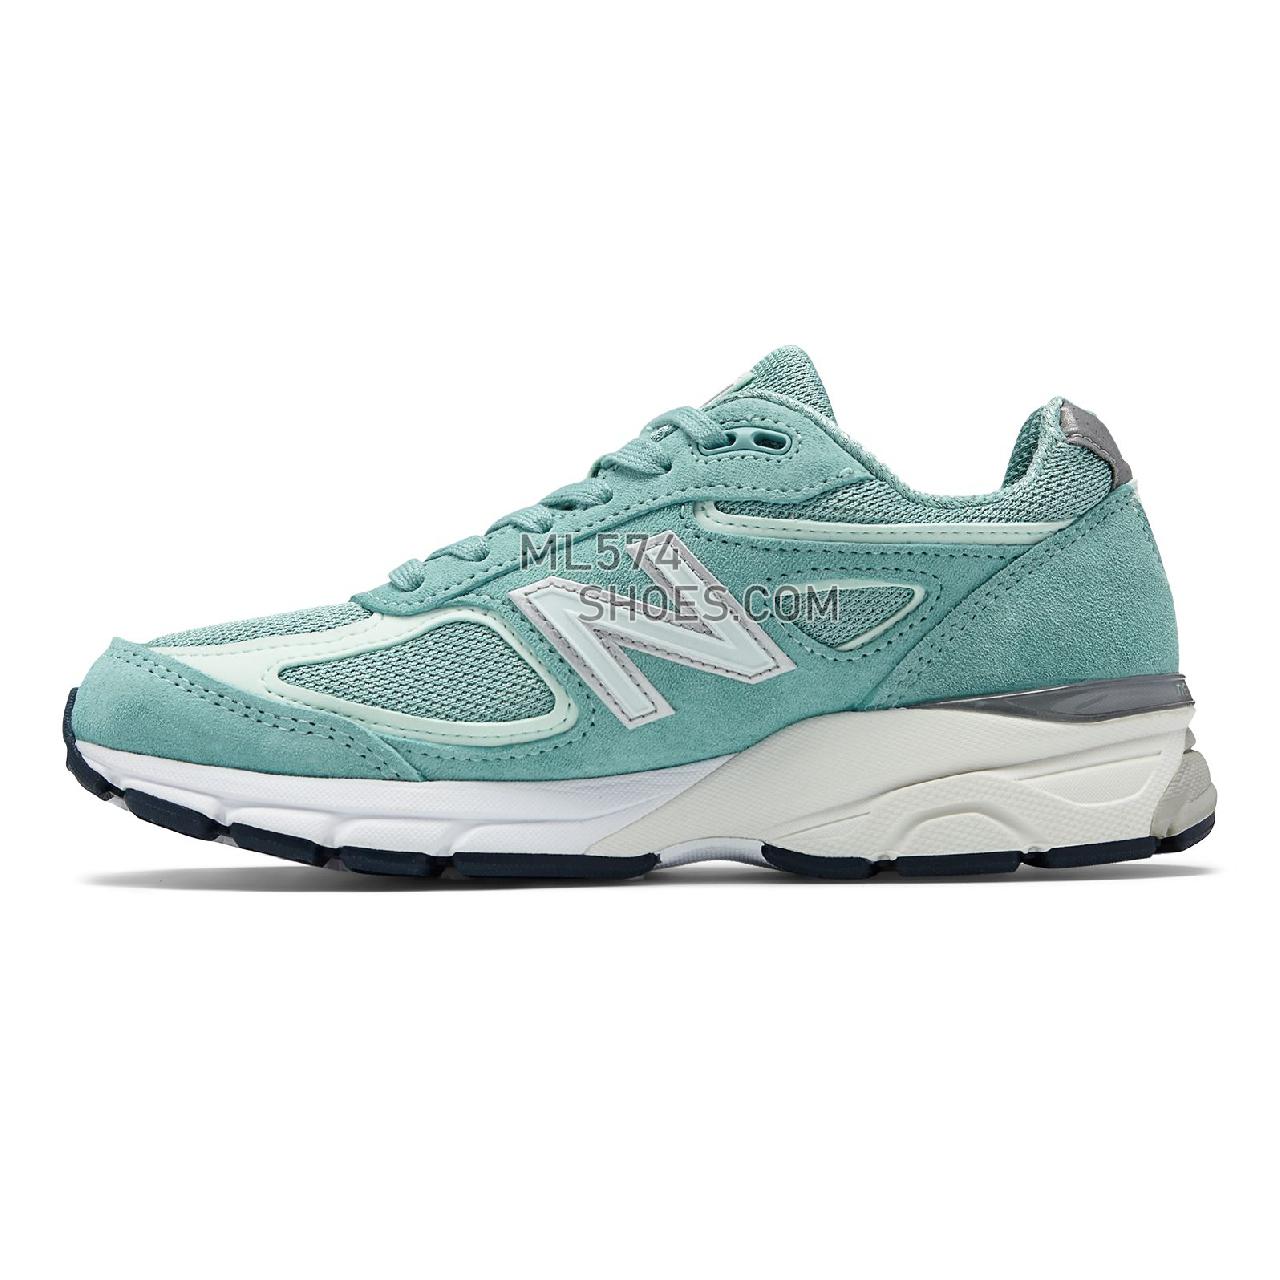 New Balance Womens 990v4 Made in US - Women's 990 - Running Mineral Sage with Seafoam - W990MS4